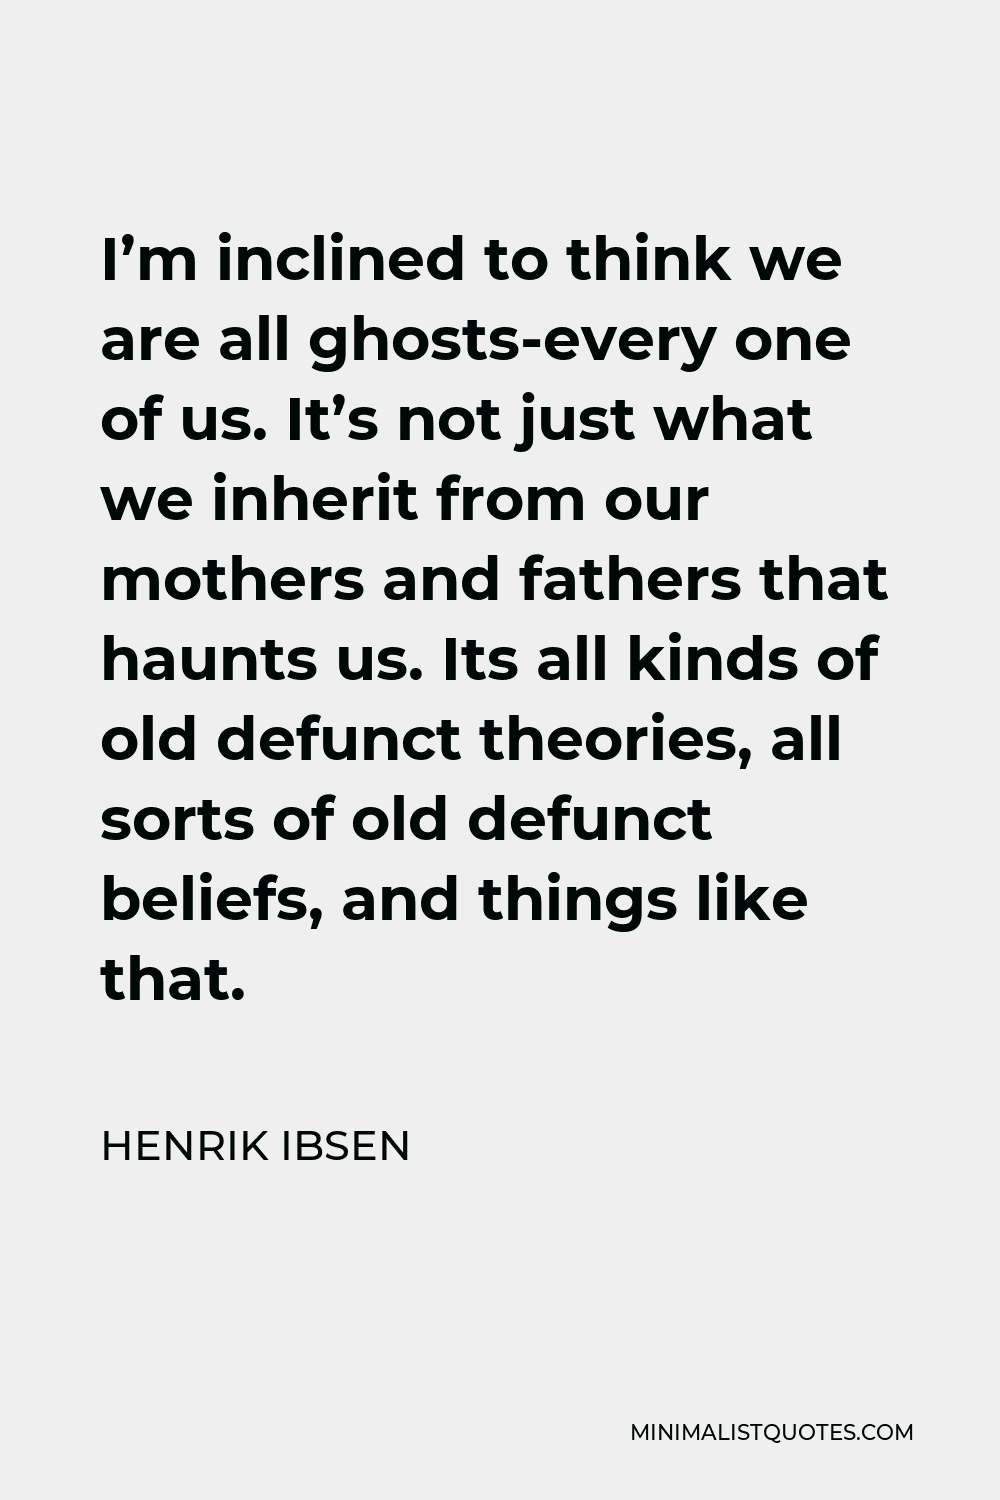 Henrik Ibsen Quote - I’m inclined to think we are all ghosts-every one of us. It’s not just what we inherit from our mothers and fathers that haunts us. Its all kinds of old defunct theories, all sorts of old defunct beliefs, and things like that.